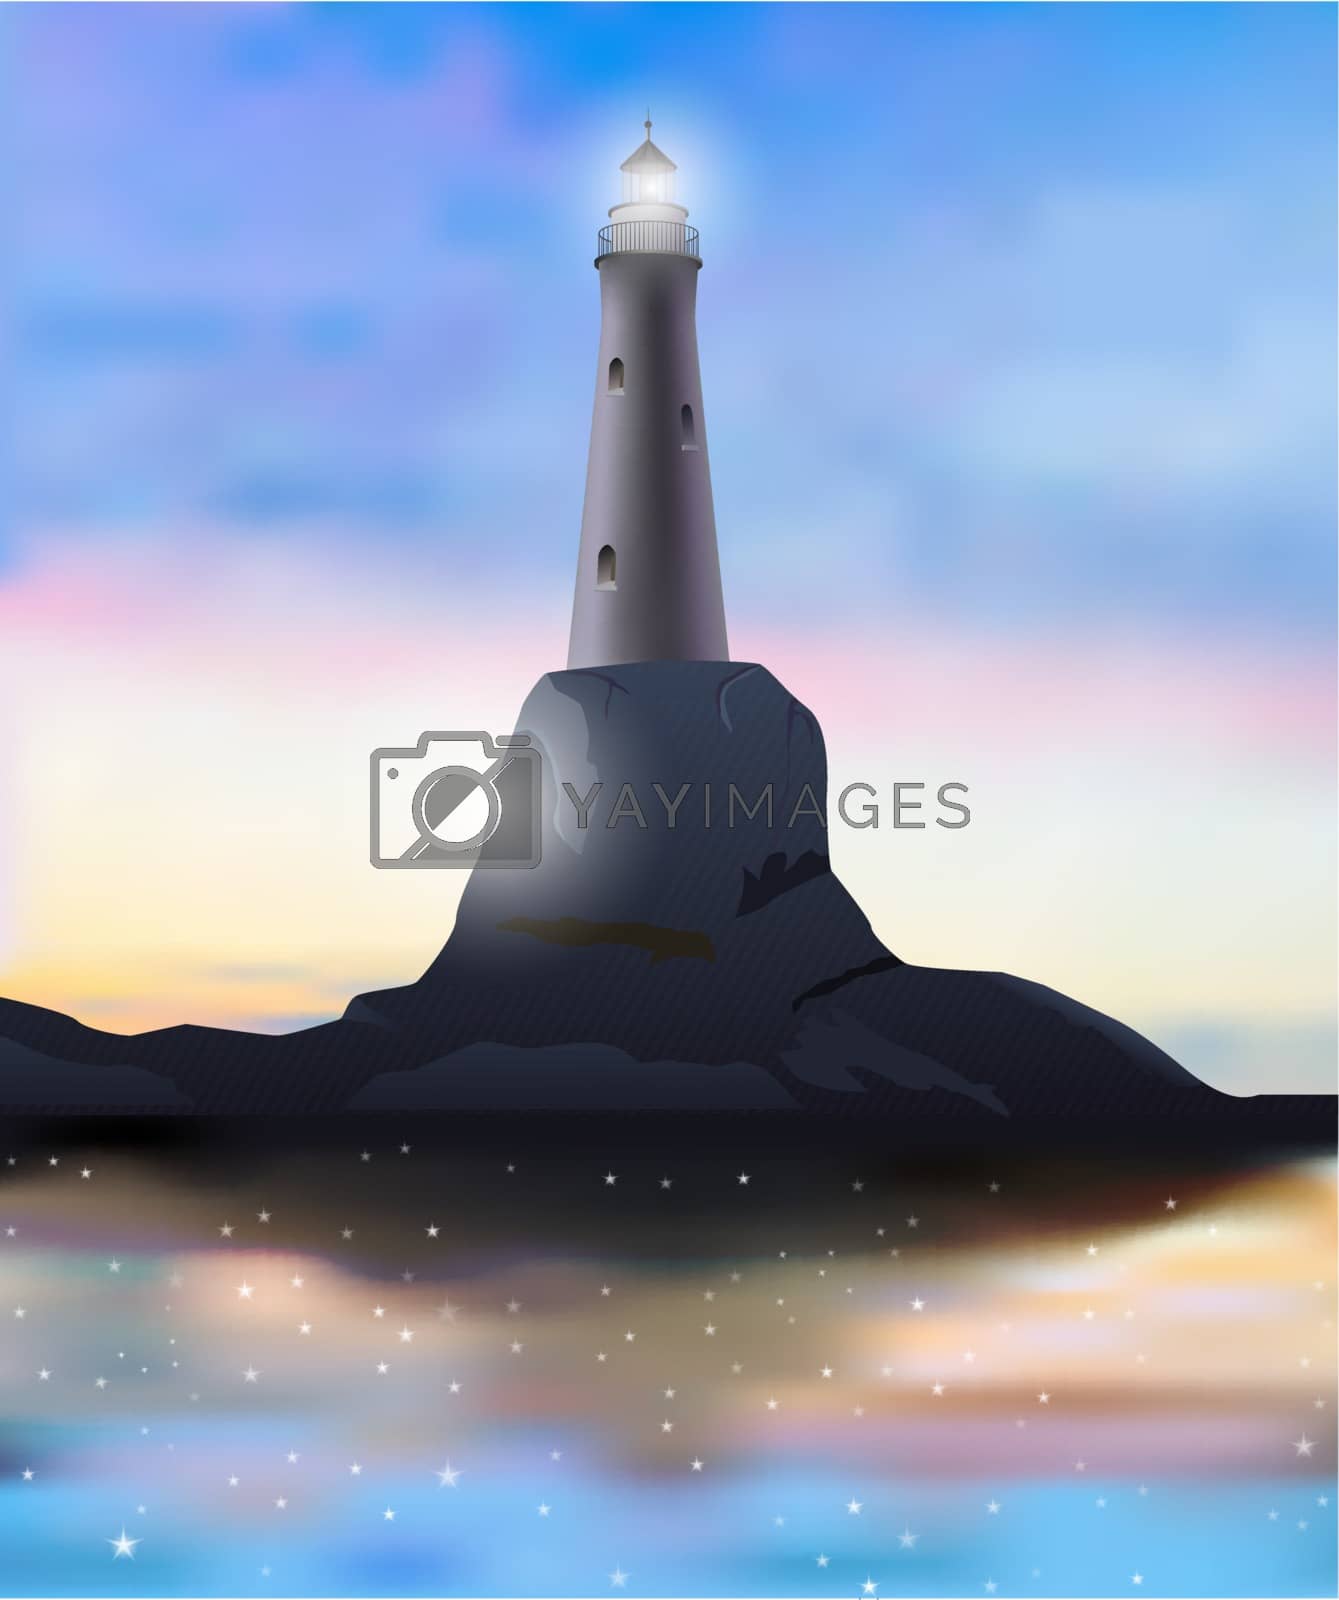 Royalty free image of lighthouse by kovacevic